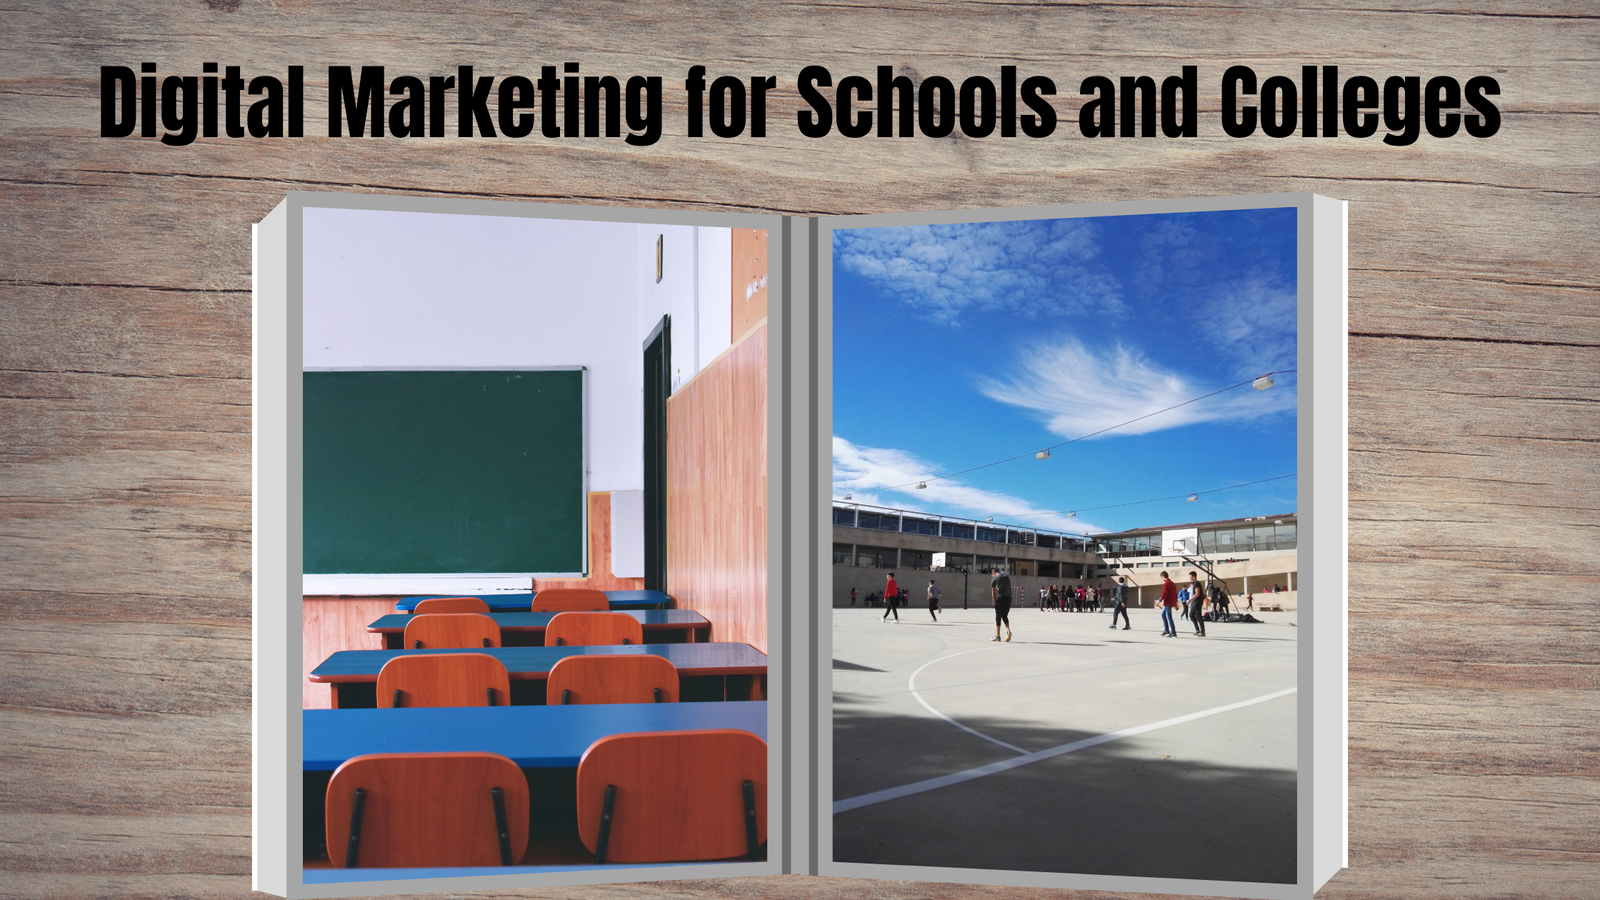 Digital Marketing for Schools and Colleges